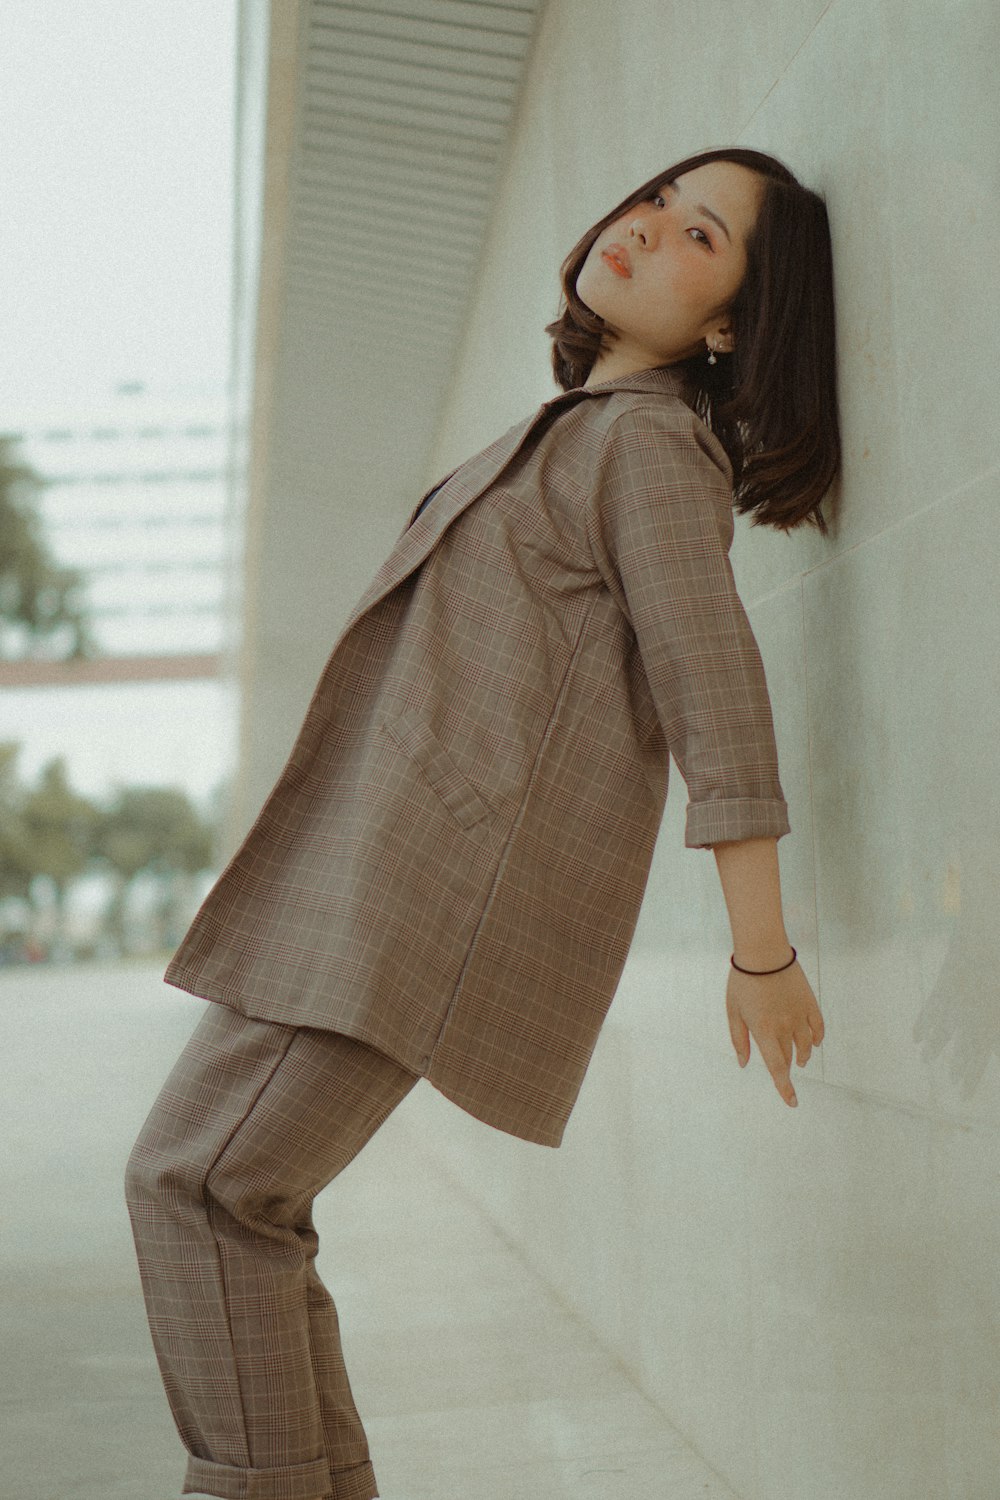 woman wearing brown blazer and pants leaning on wall